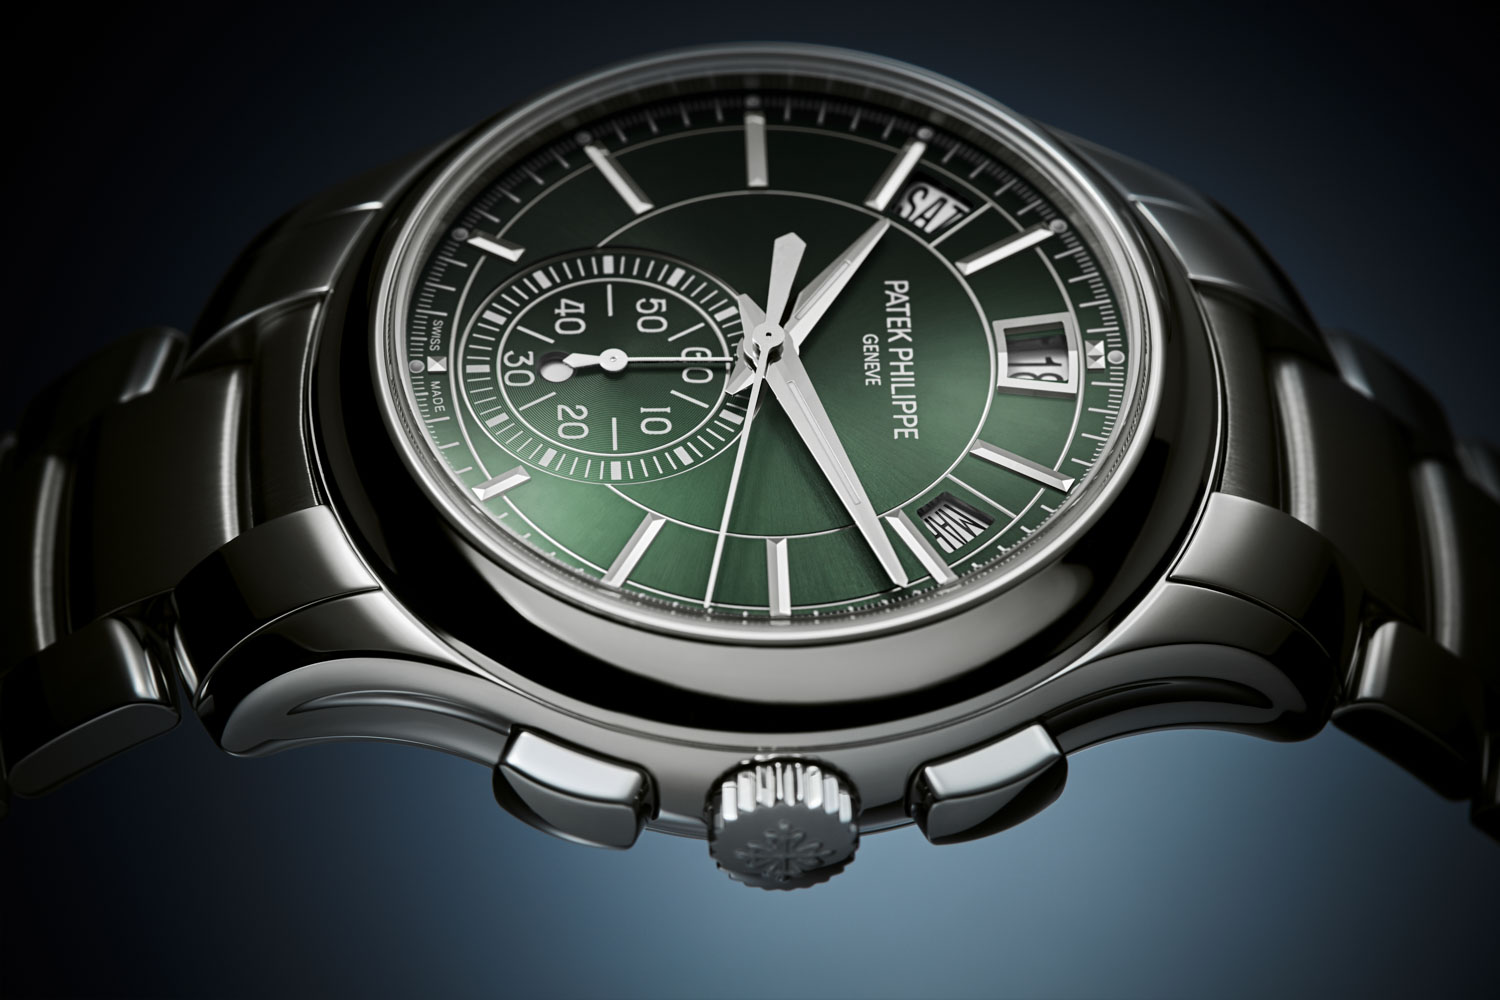 Reference 5905/1A-001 Self-winding Flyback Chronograph with Annual Calendar in stainless steel